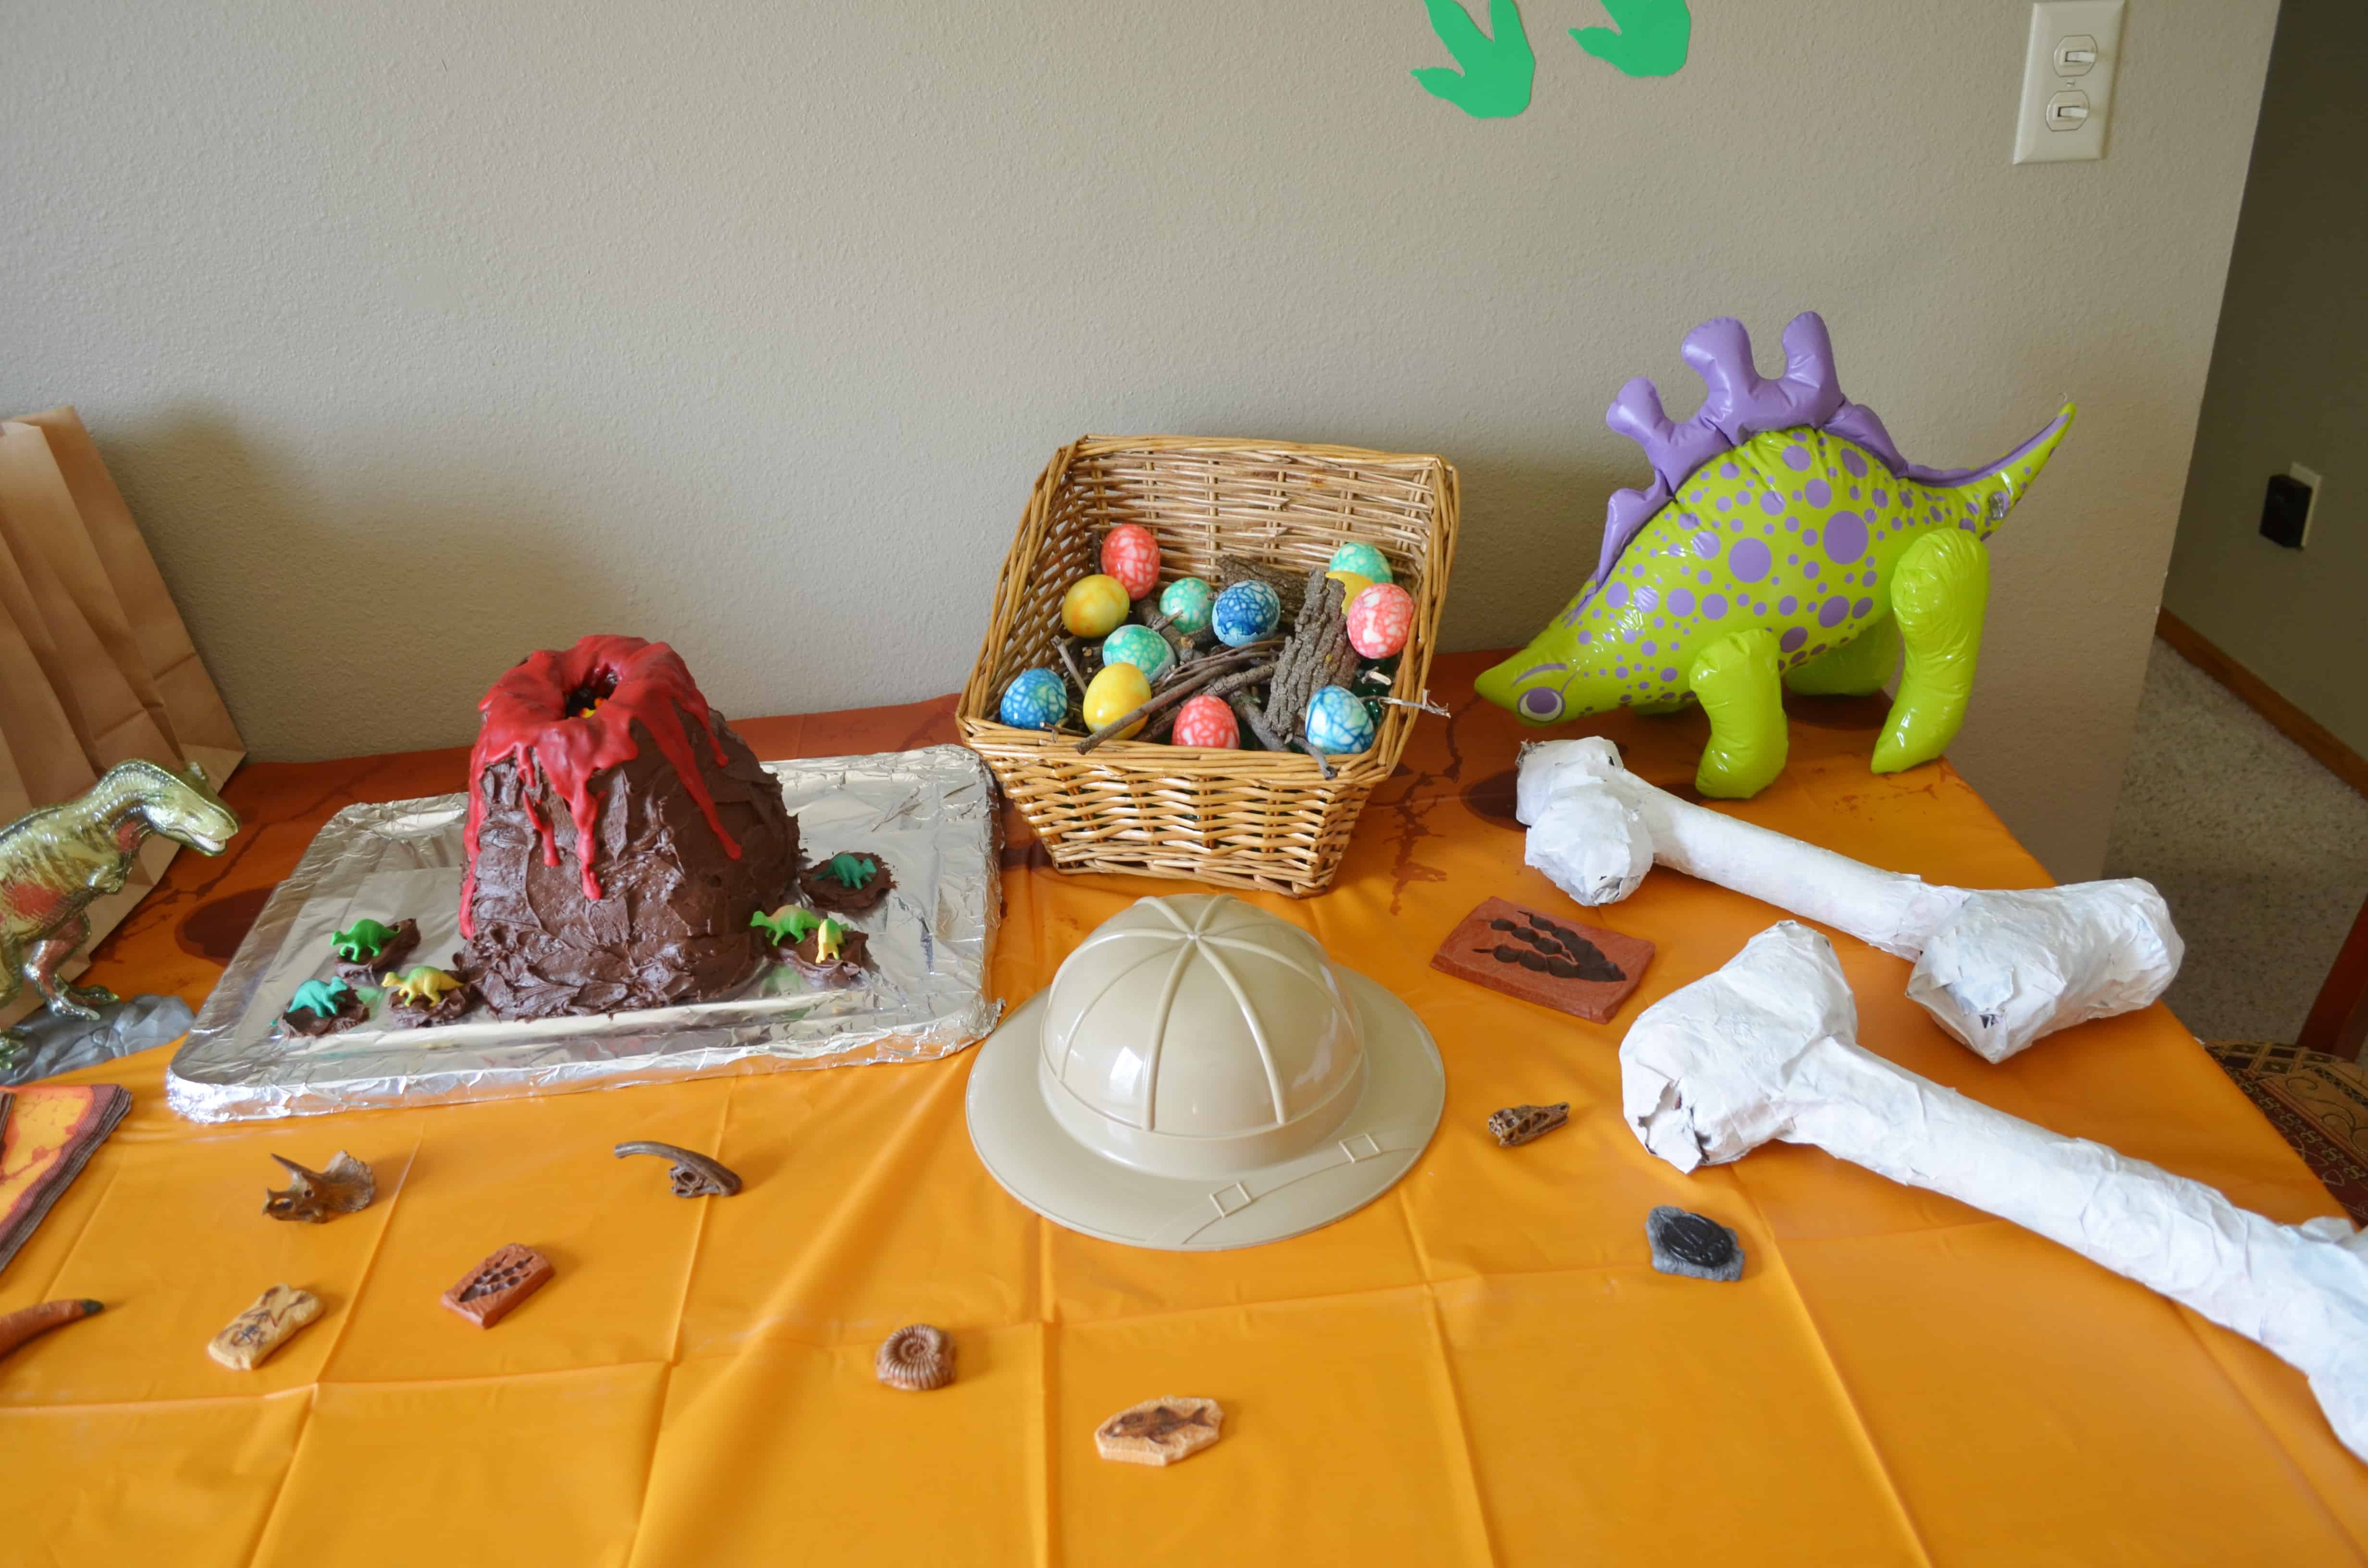 fossil-or-dinosaur-birthday-party-ideas-on-a-frugal-budget-surviving